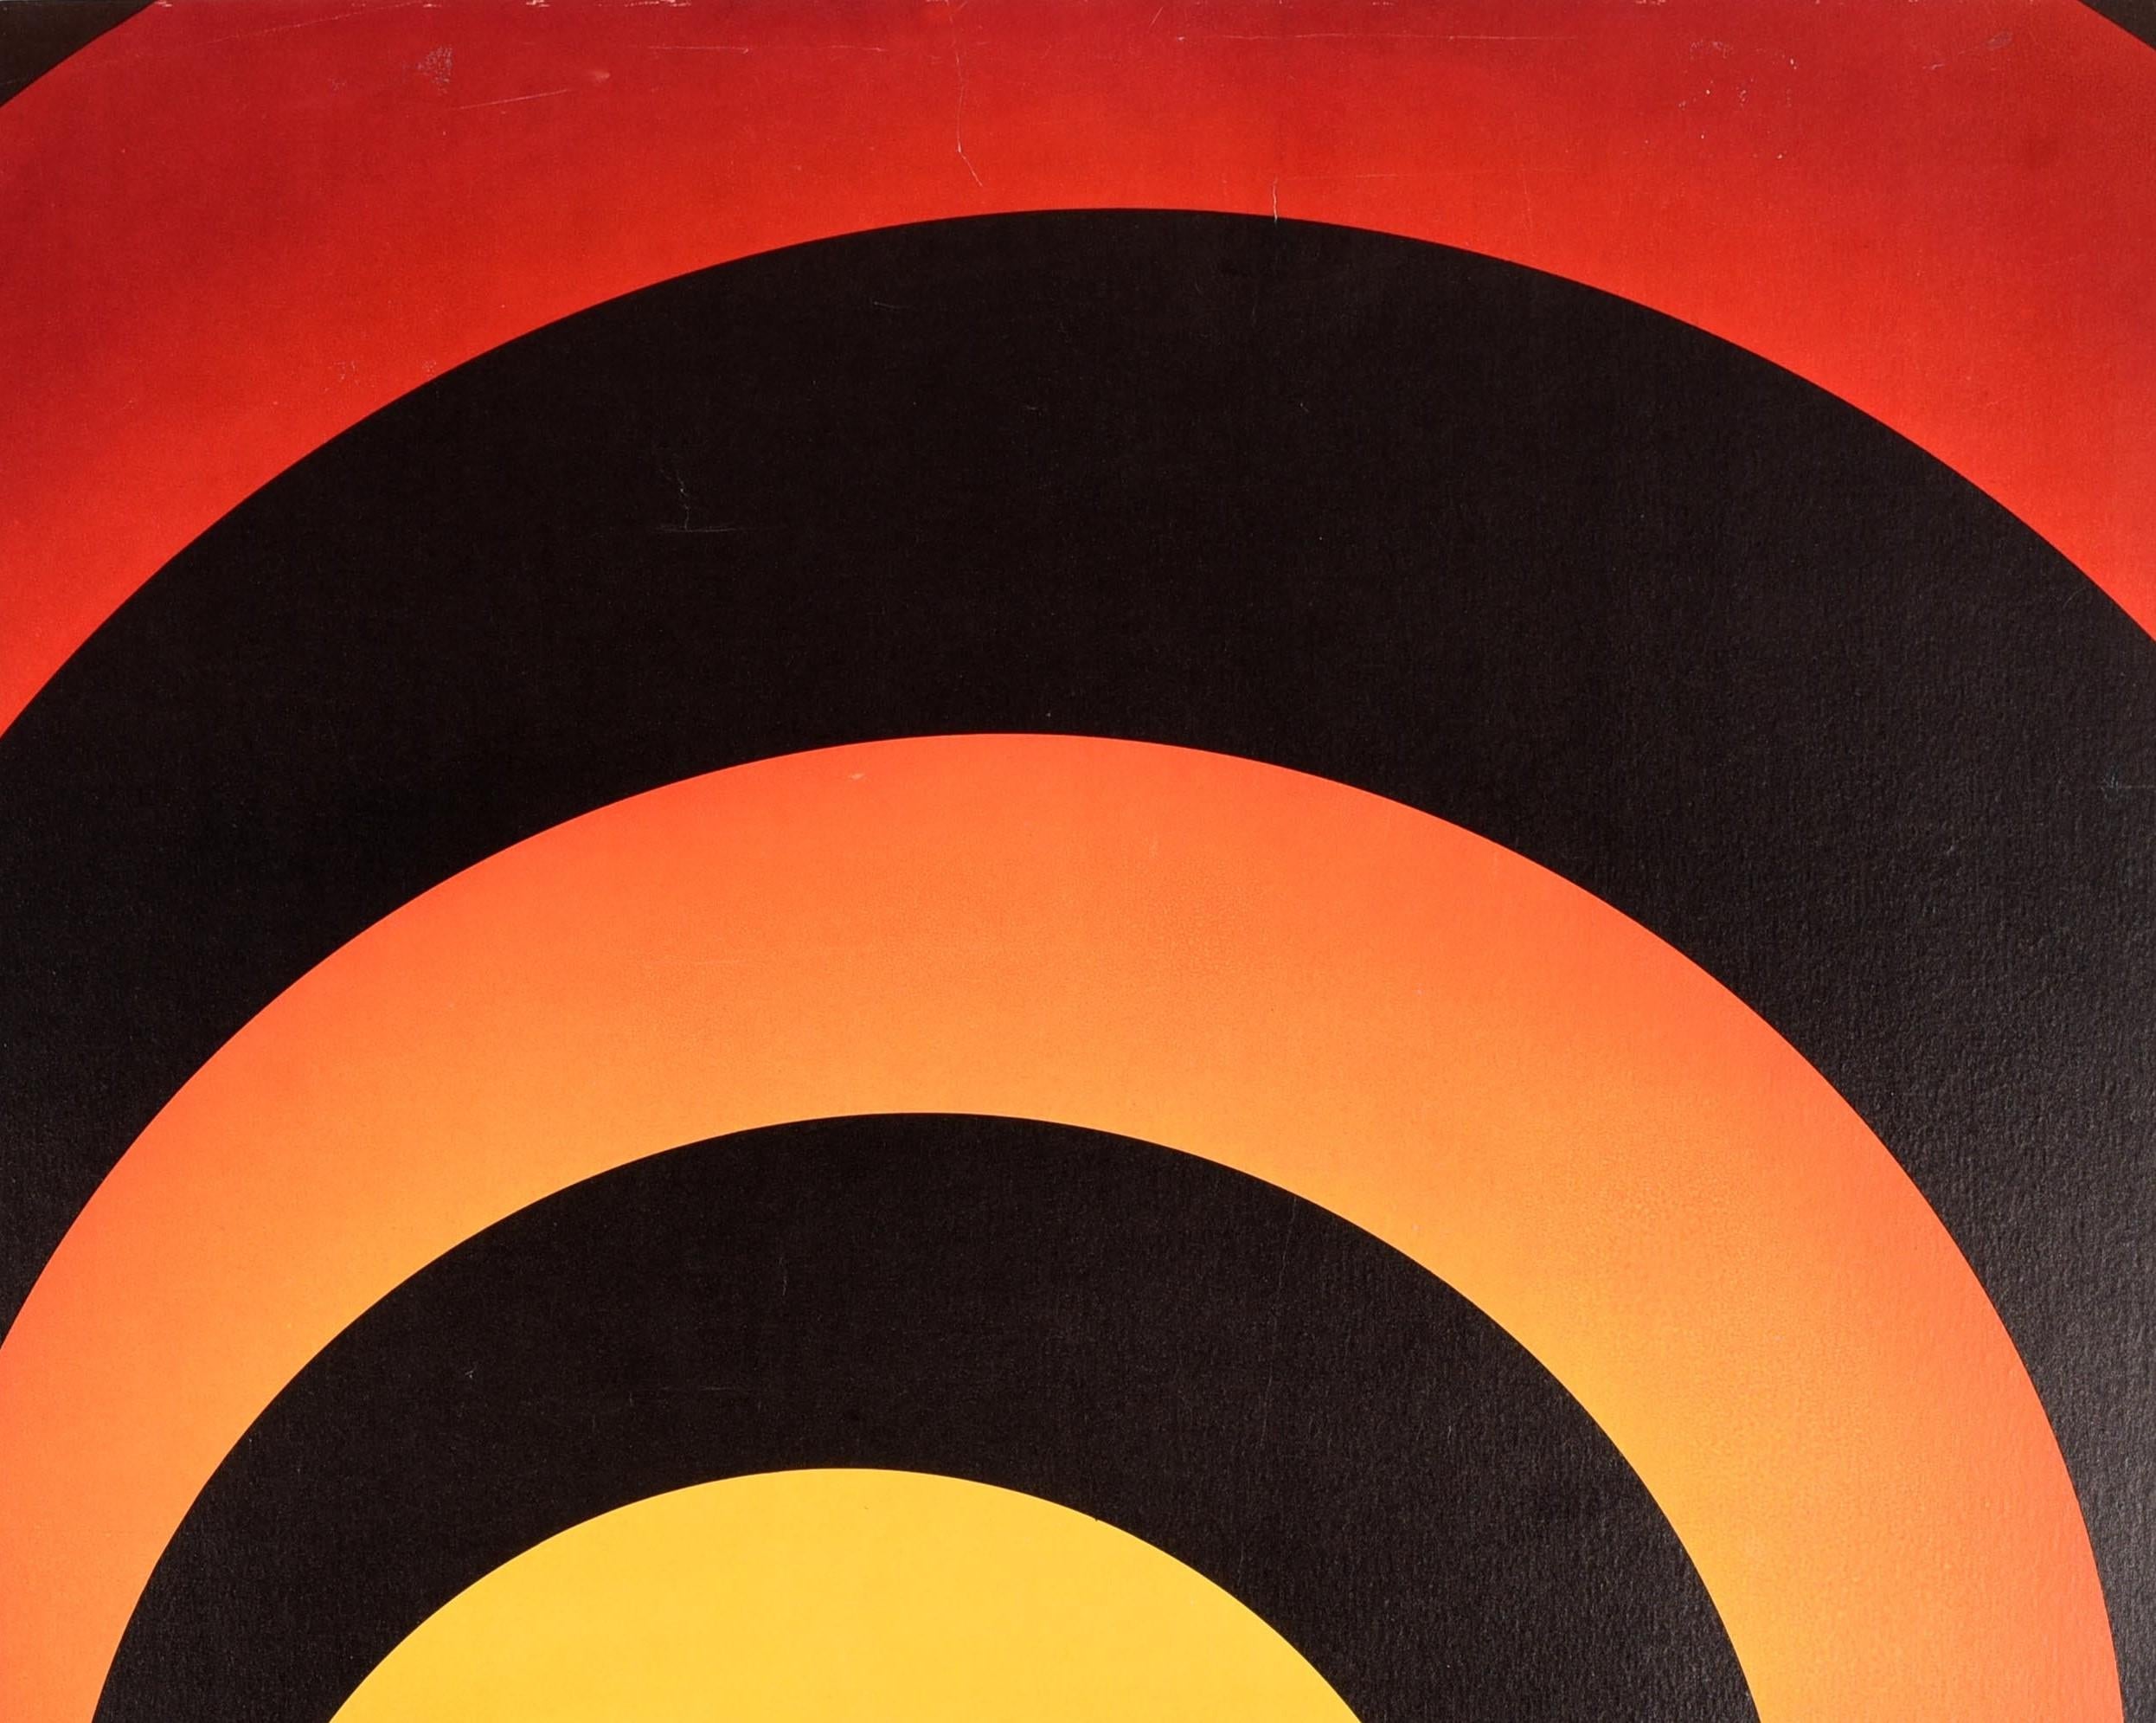 Original vintage travel poster for Japan issued by Pan Am featuring a great graphic design showing a lady dancing in the centre of a James Bond style target formed by black circles against a yellow, orange and red shaded background with the stylized